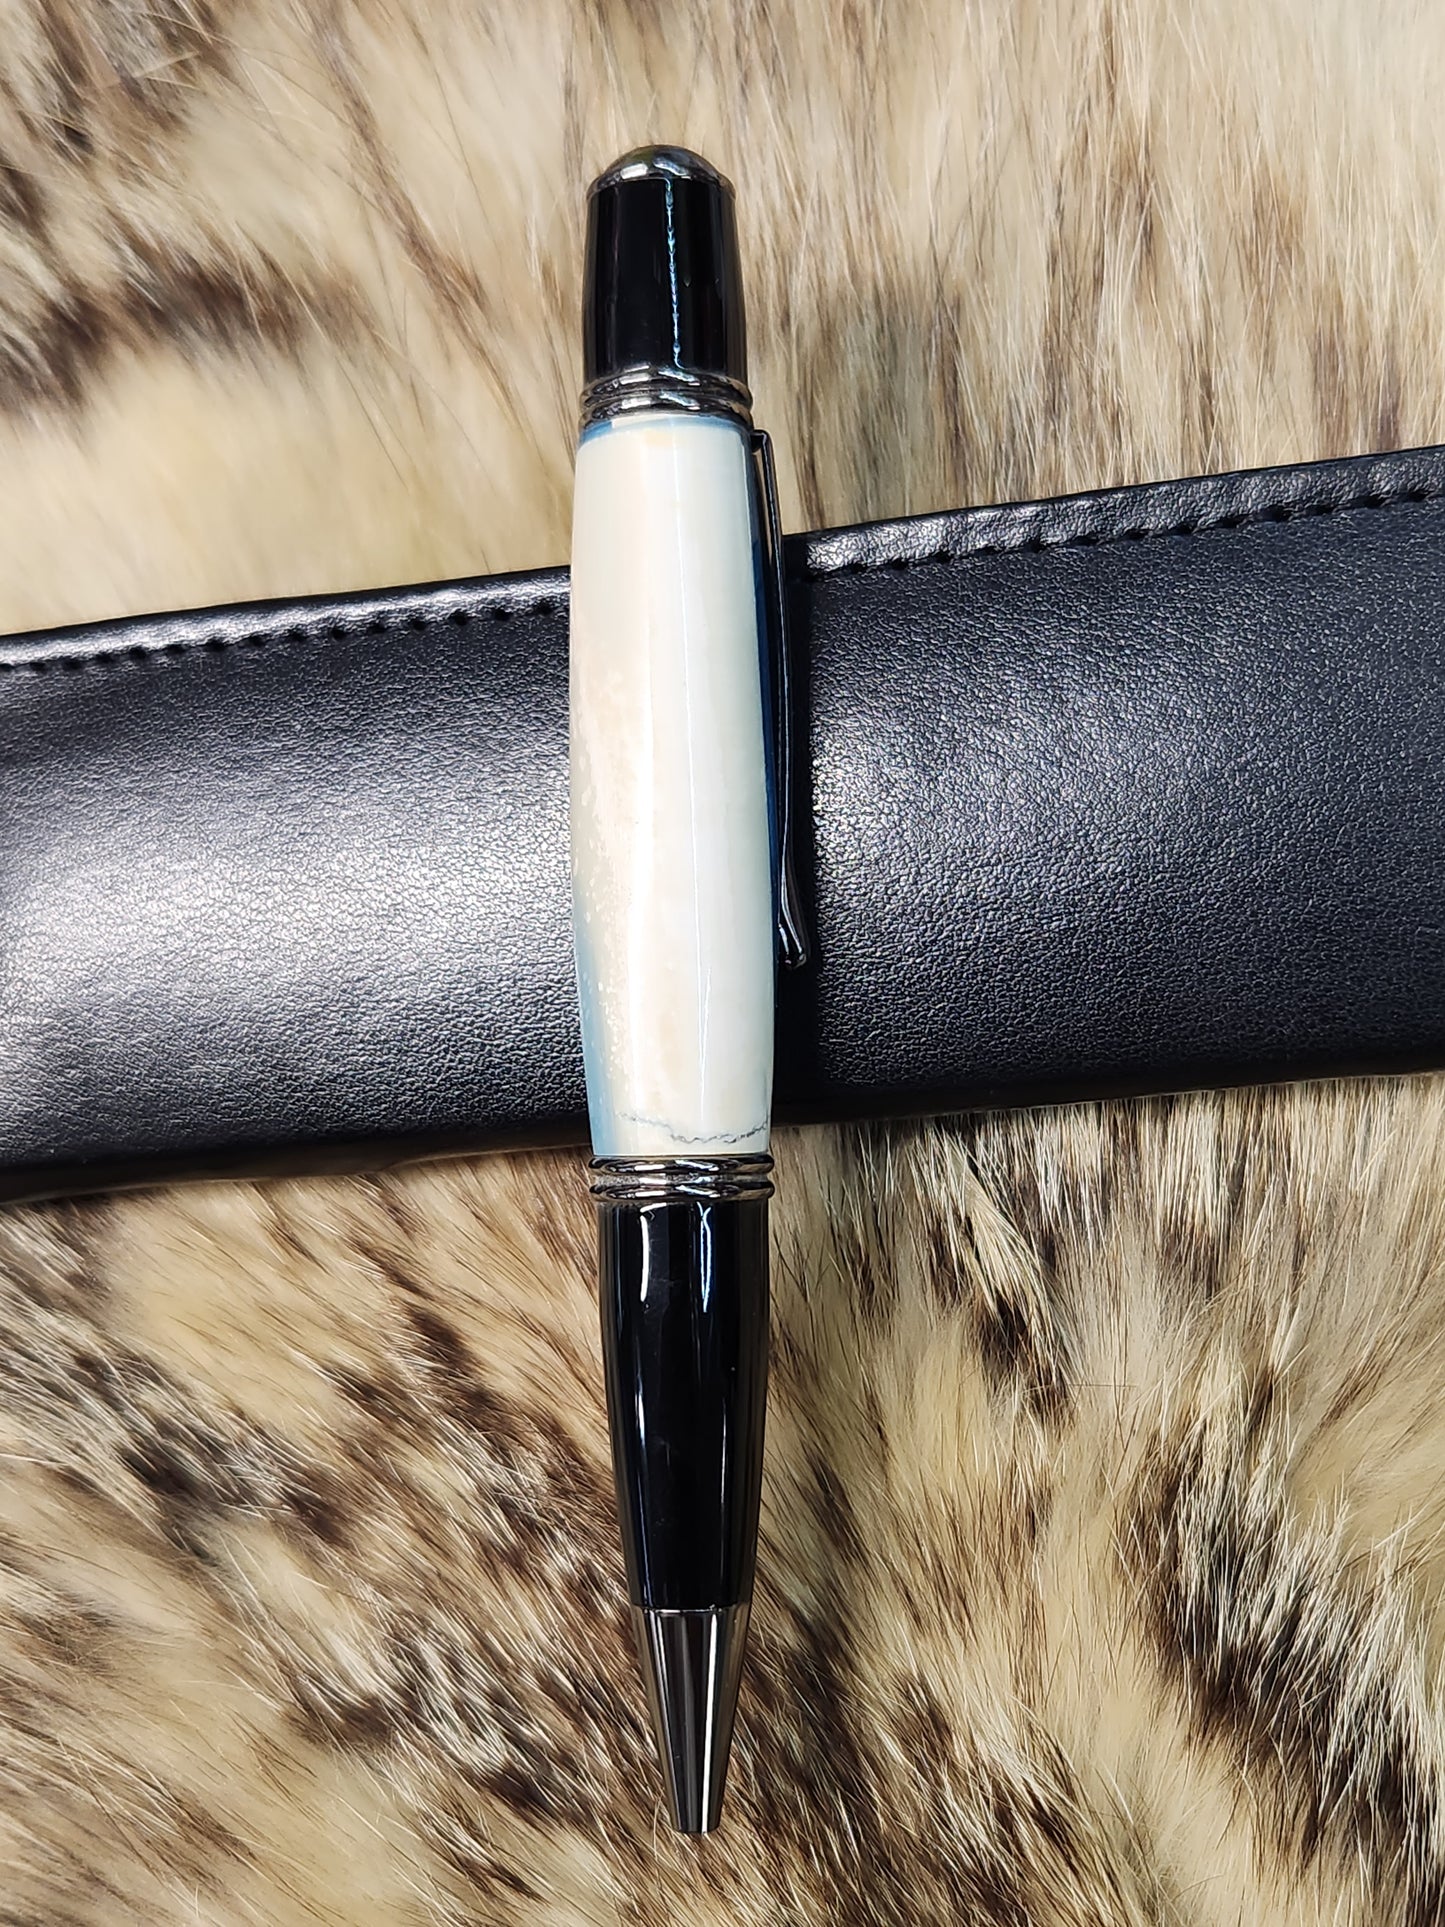 Gatsby style Pen Mammoth ivory in blue resin